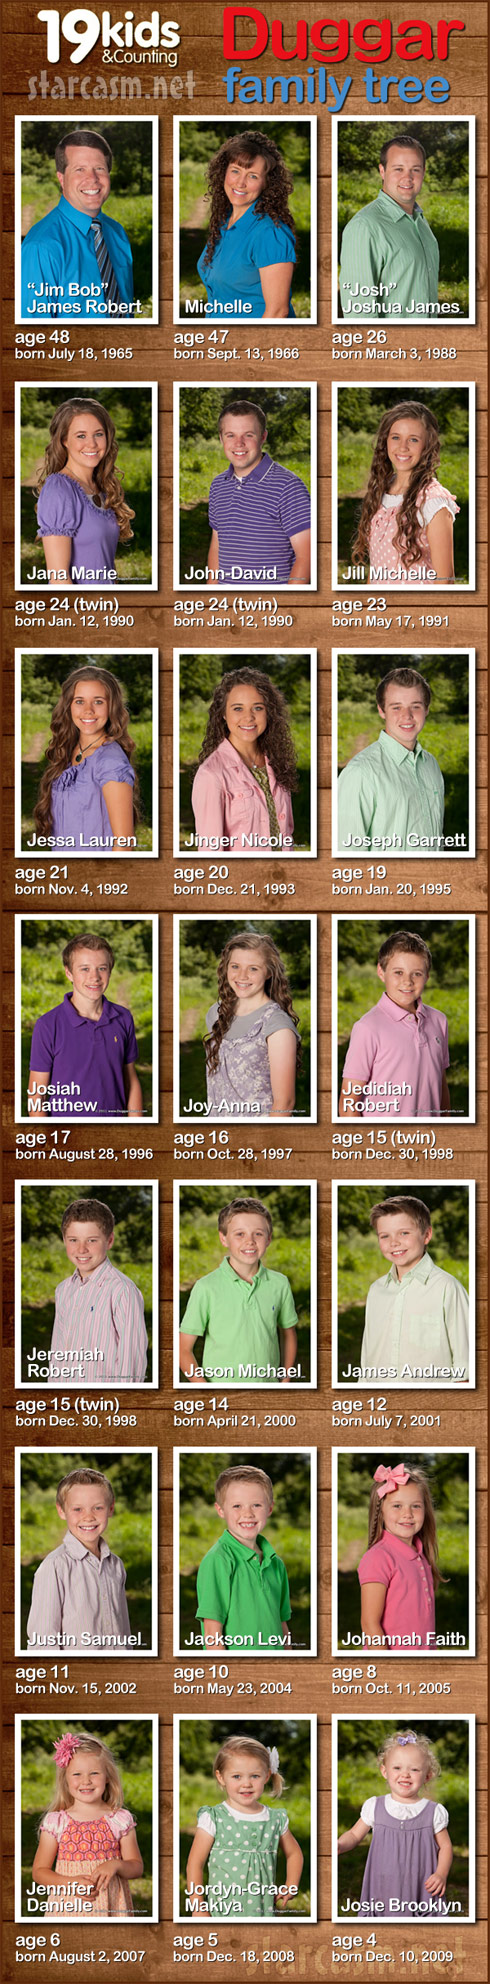 Photos of all the Duggar children from 19 Kids & Counting with ages and birthdays